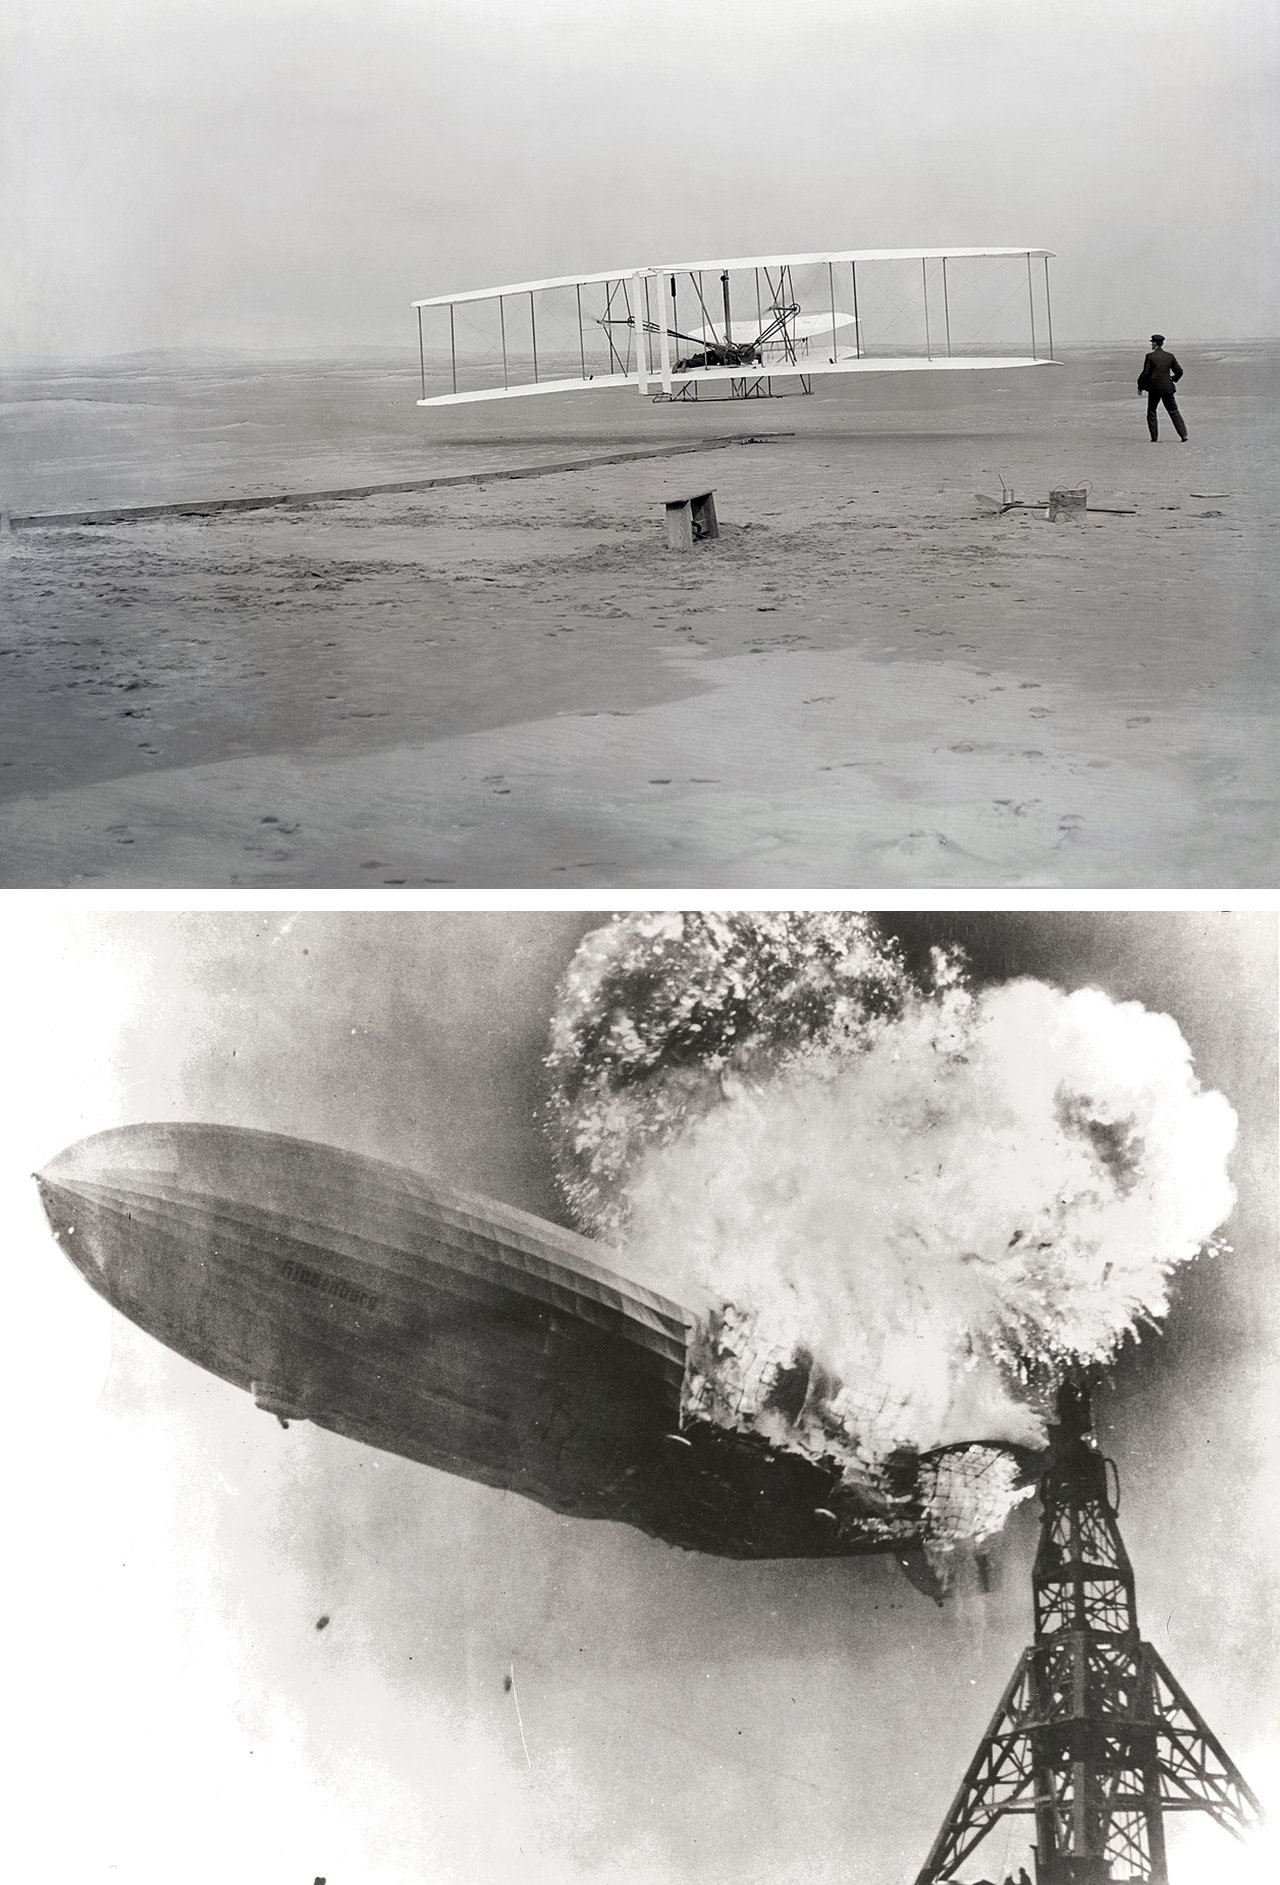 A collage of two photographs. Top image: A historic black and white photo of the Wright Brothers' about to perform their first flight in 1903. Bottom image: Picture of the LZ-129 Hindenburg zeppelin engulfed in flames on May 6, 1937, at the Lakehurst Naval Air Station.